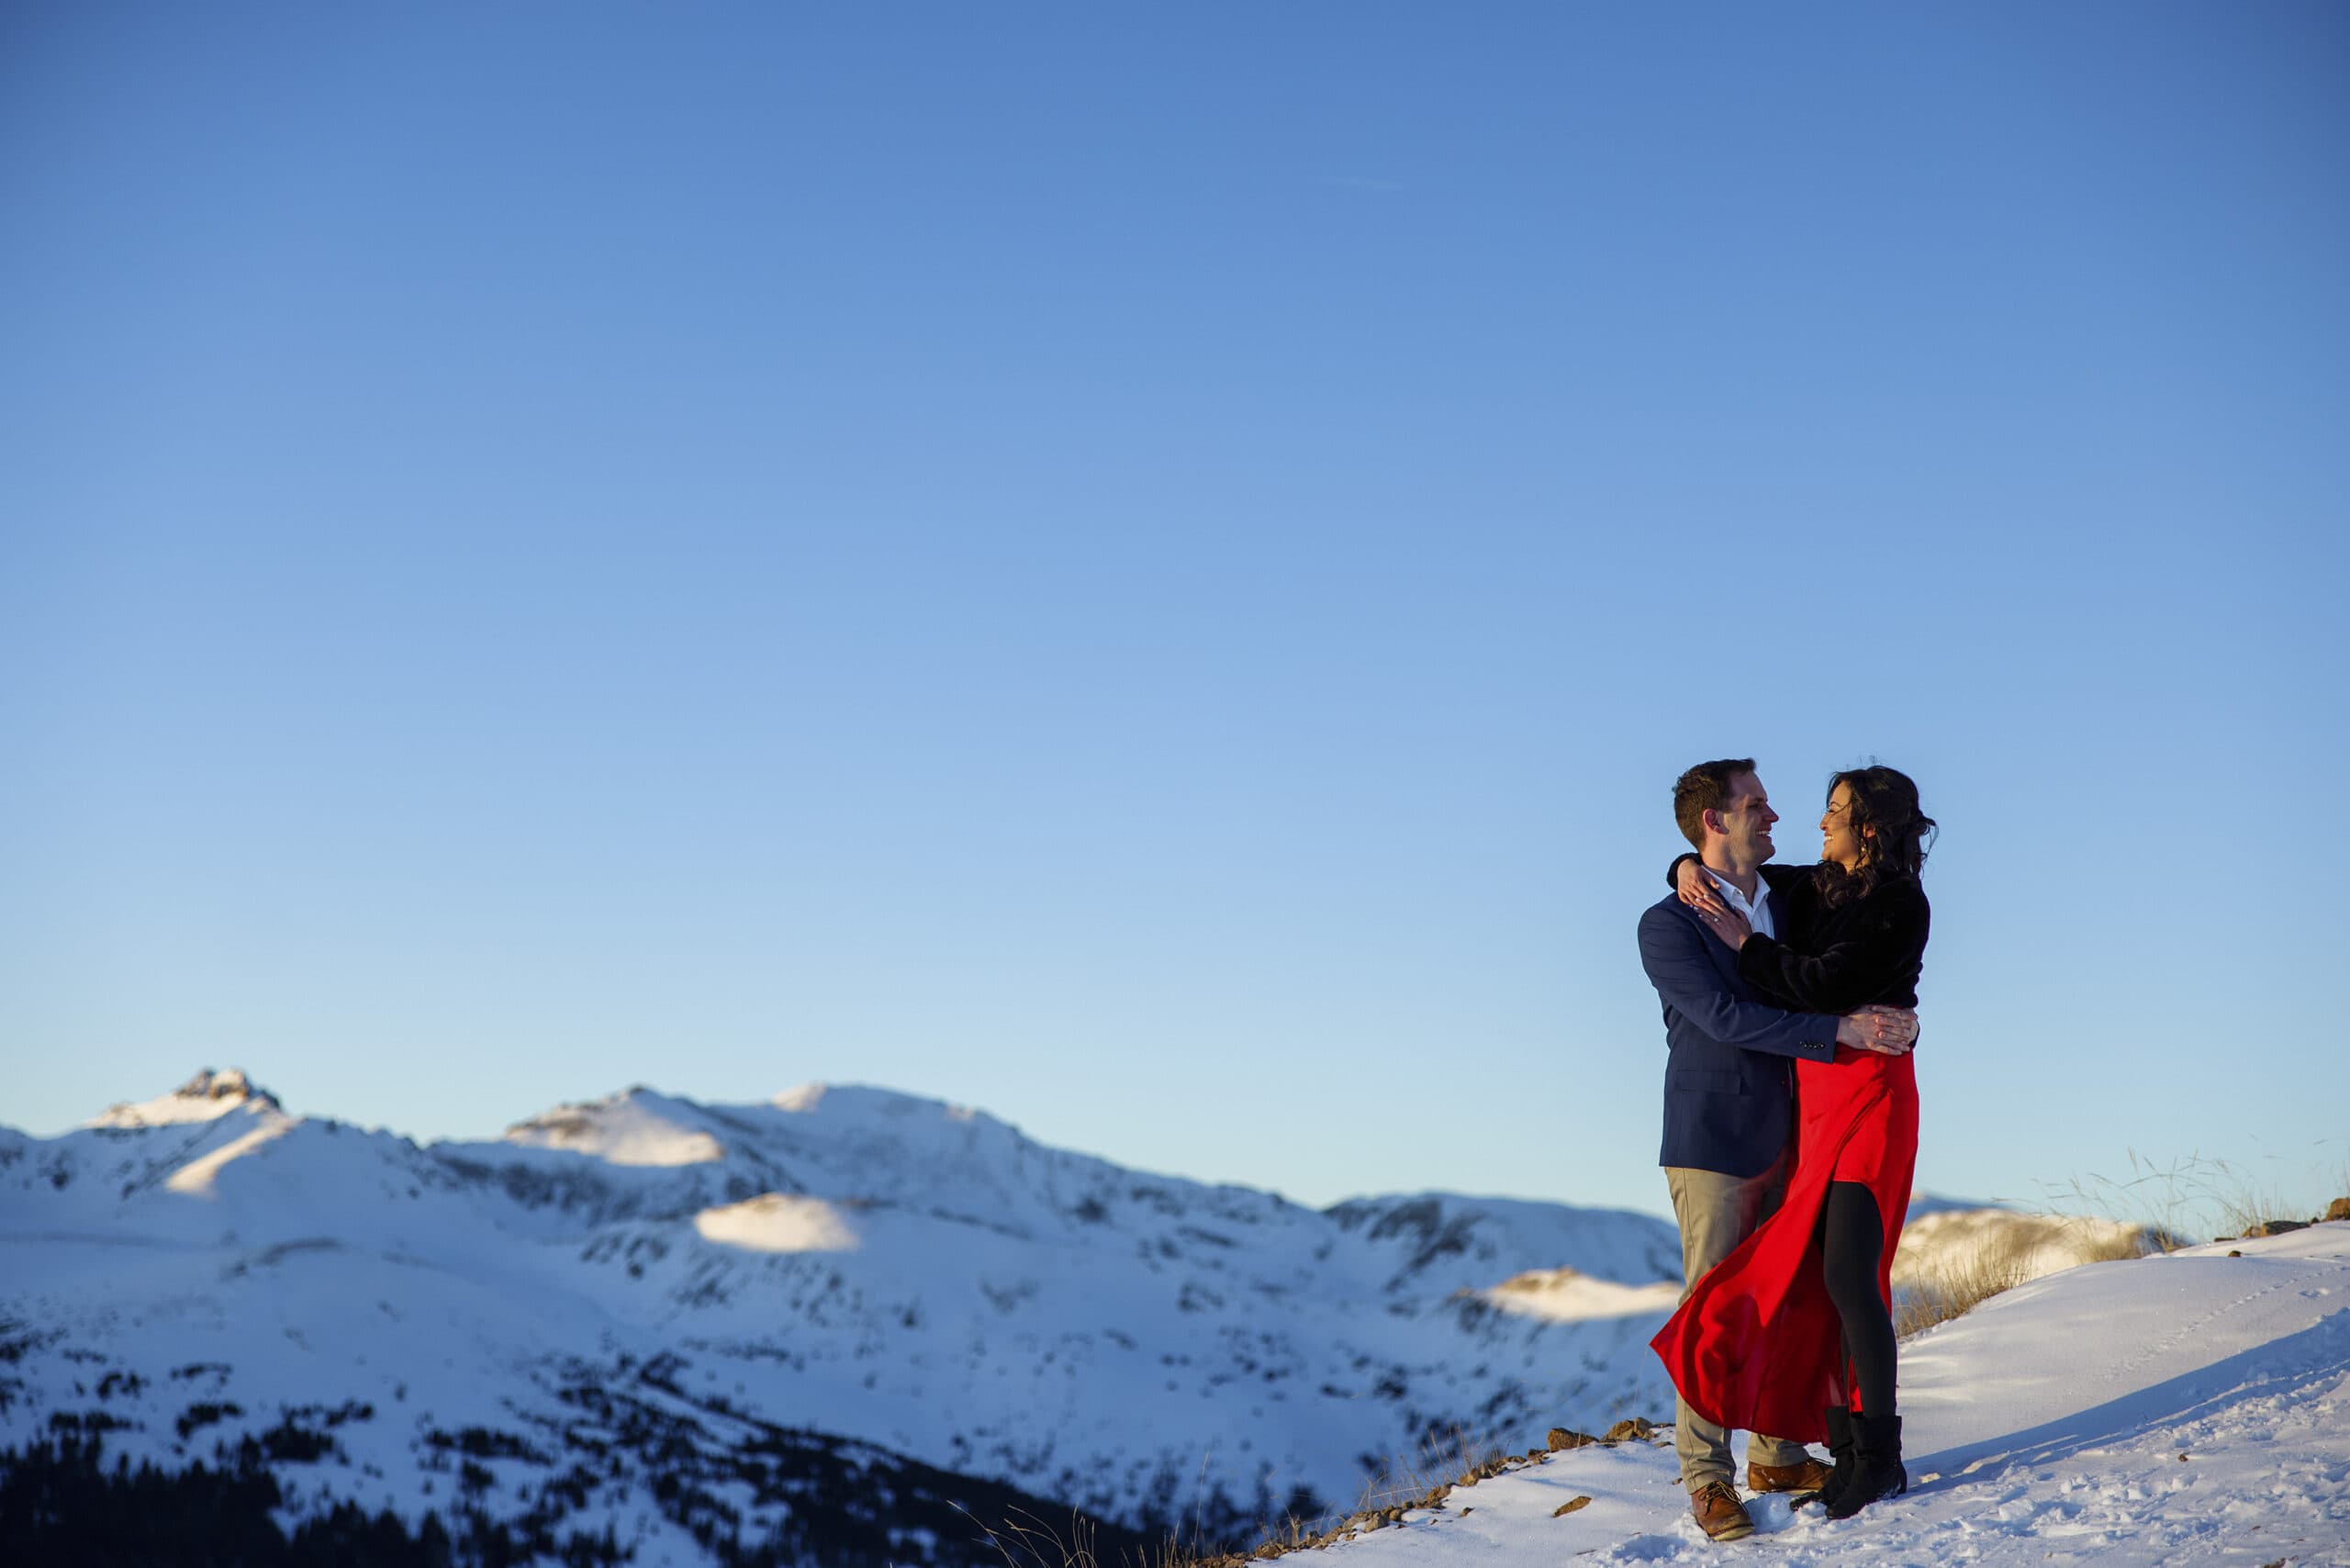 A woman wearing a red dress is held by her spouse in the Rocky Mountains in the snow